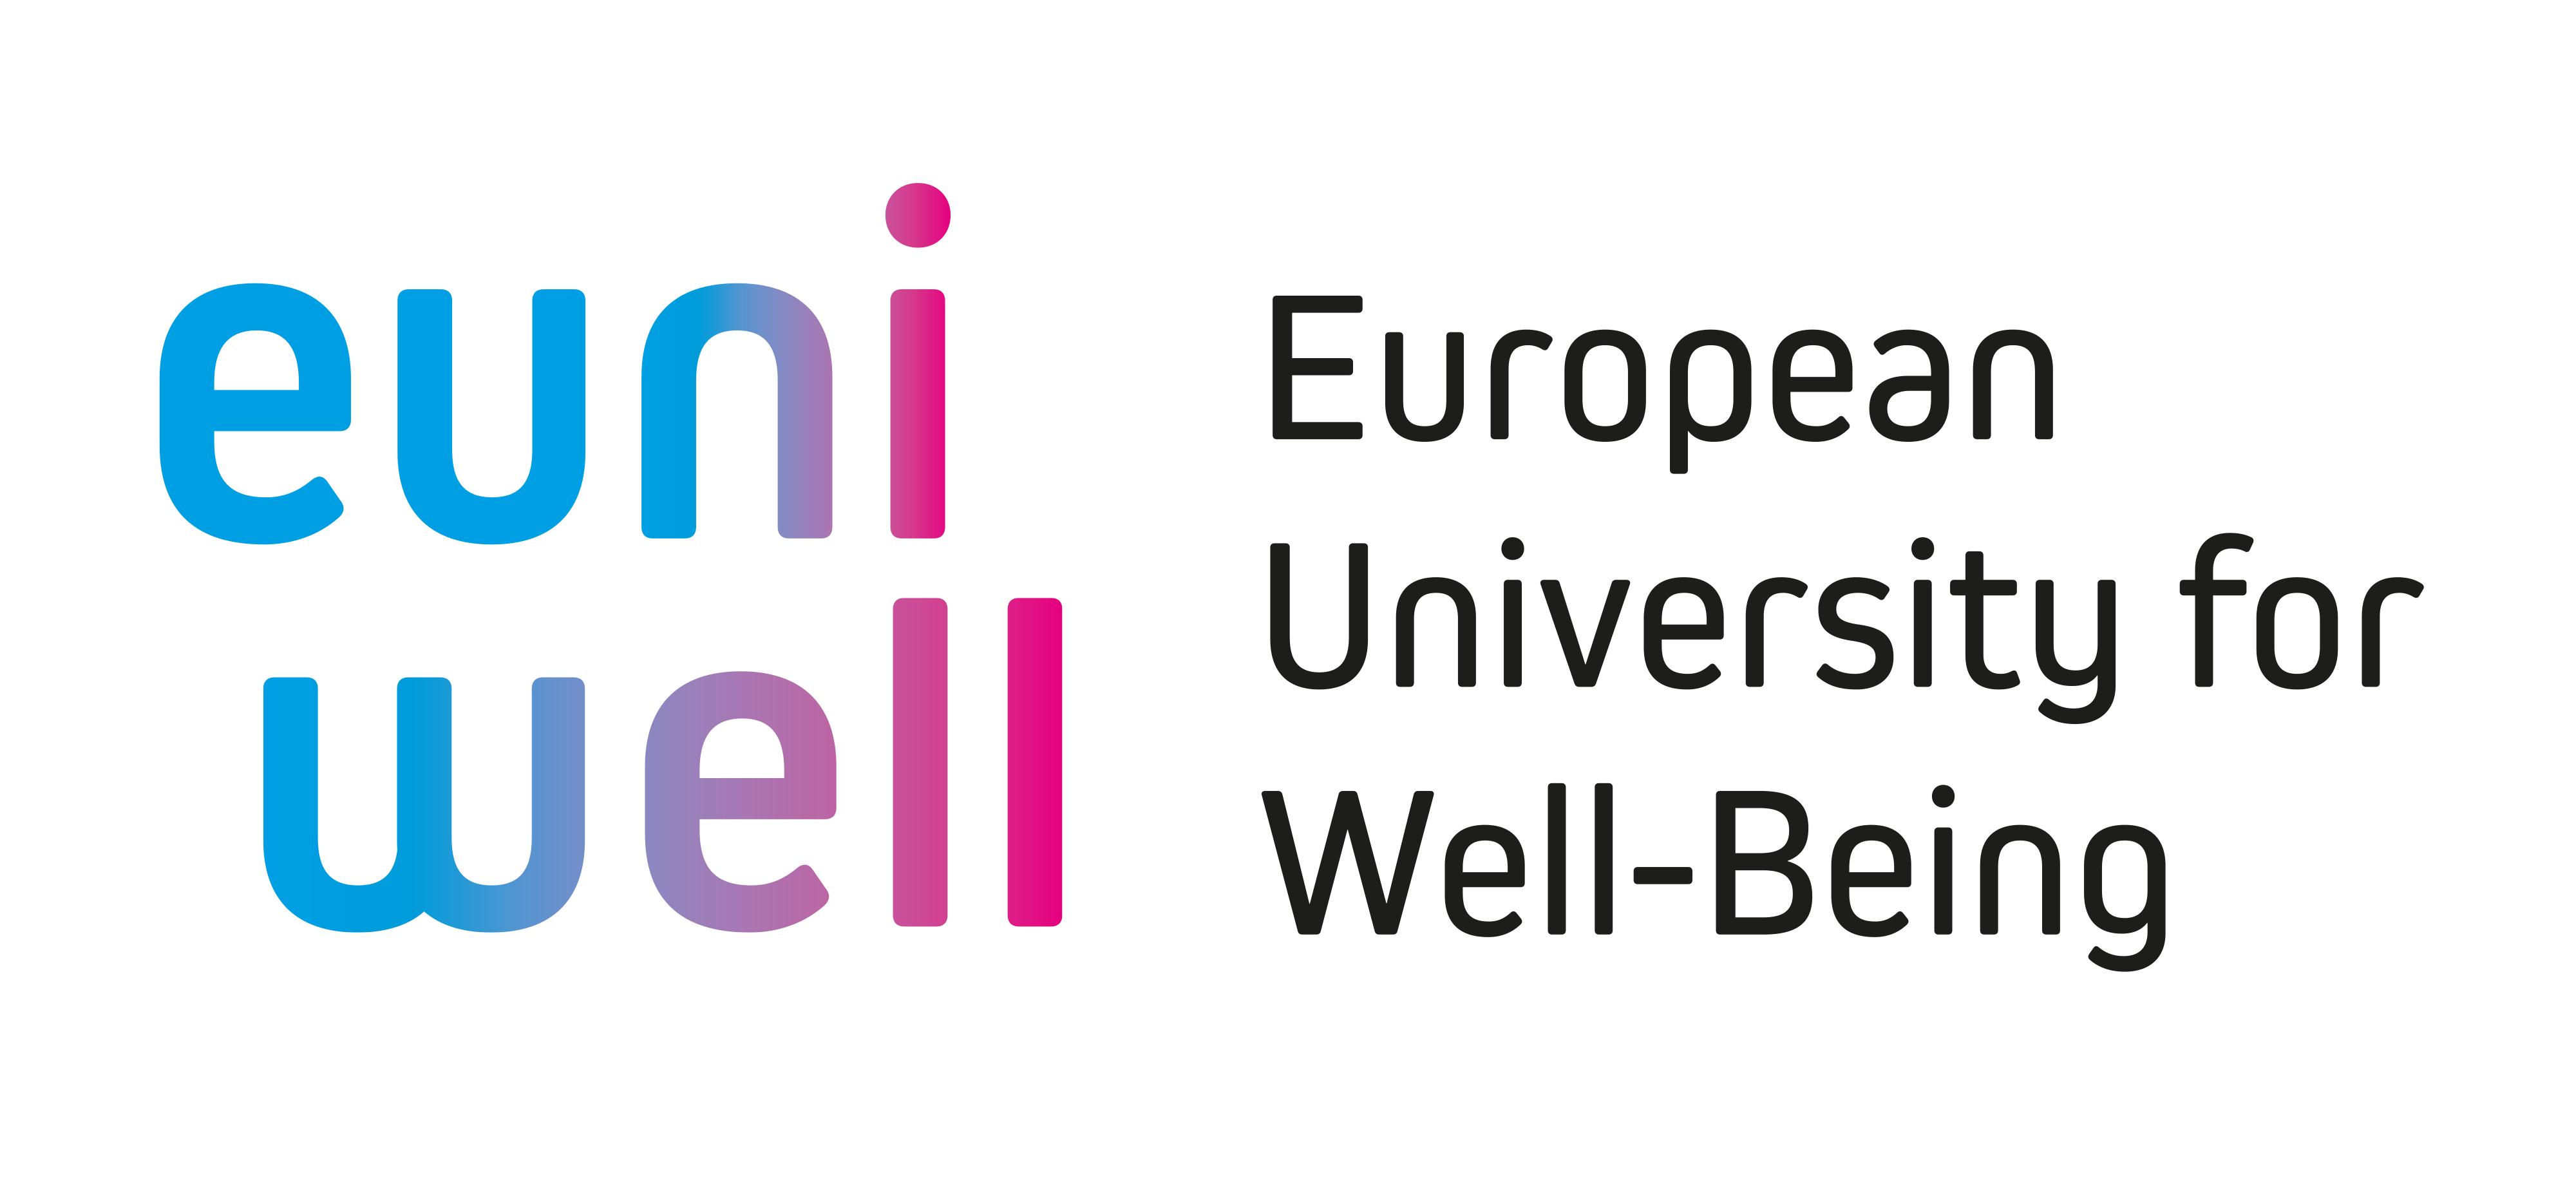 The EUniWell logo featuring the text "euniwell" in a cyan and pink gradient and the text "European University for Well-Being" in black.